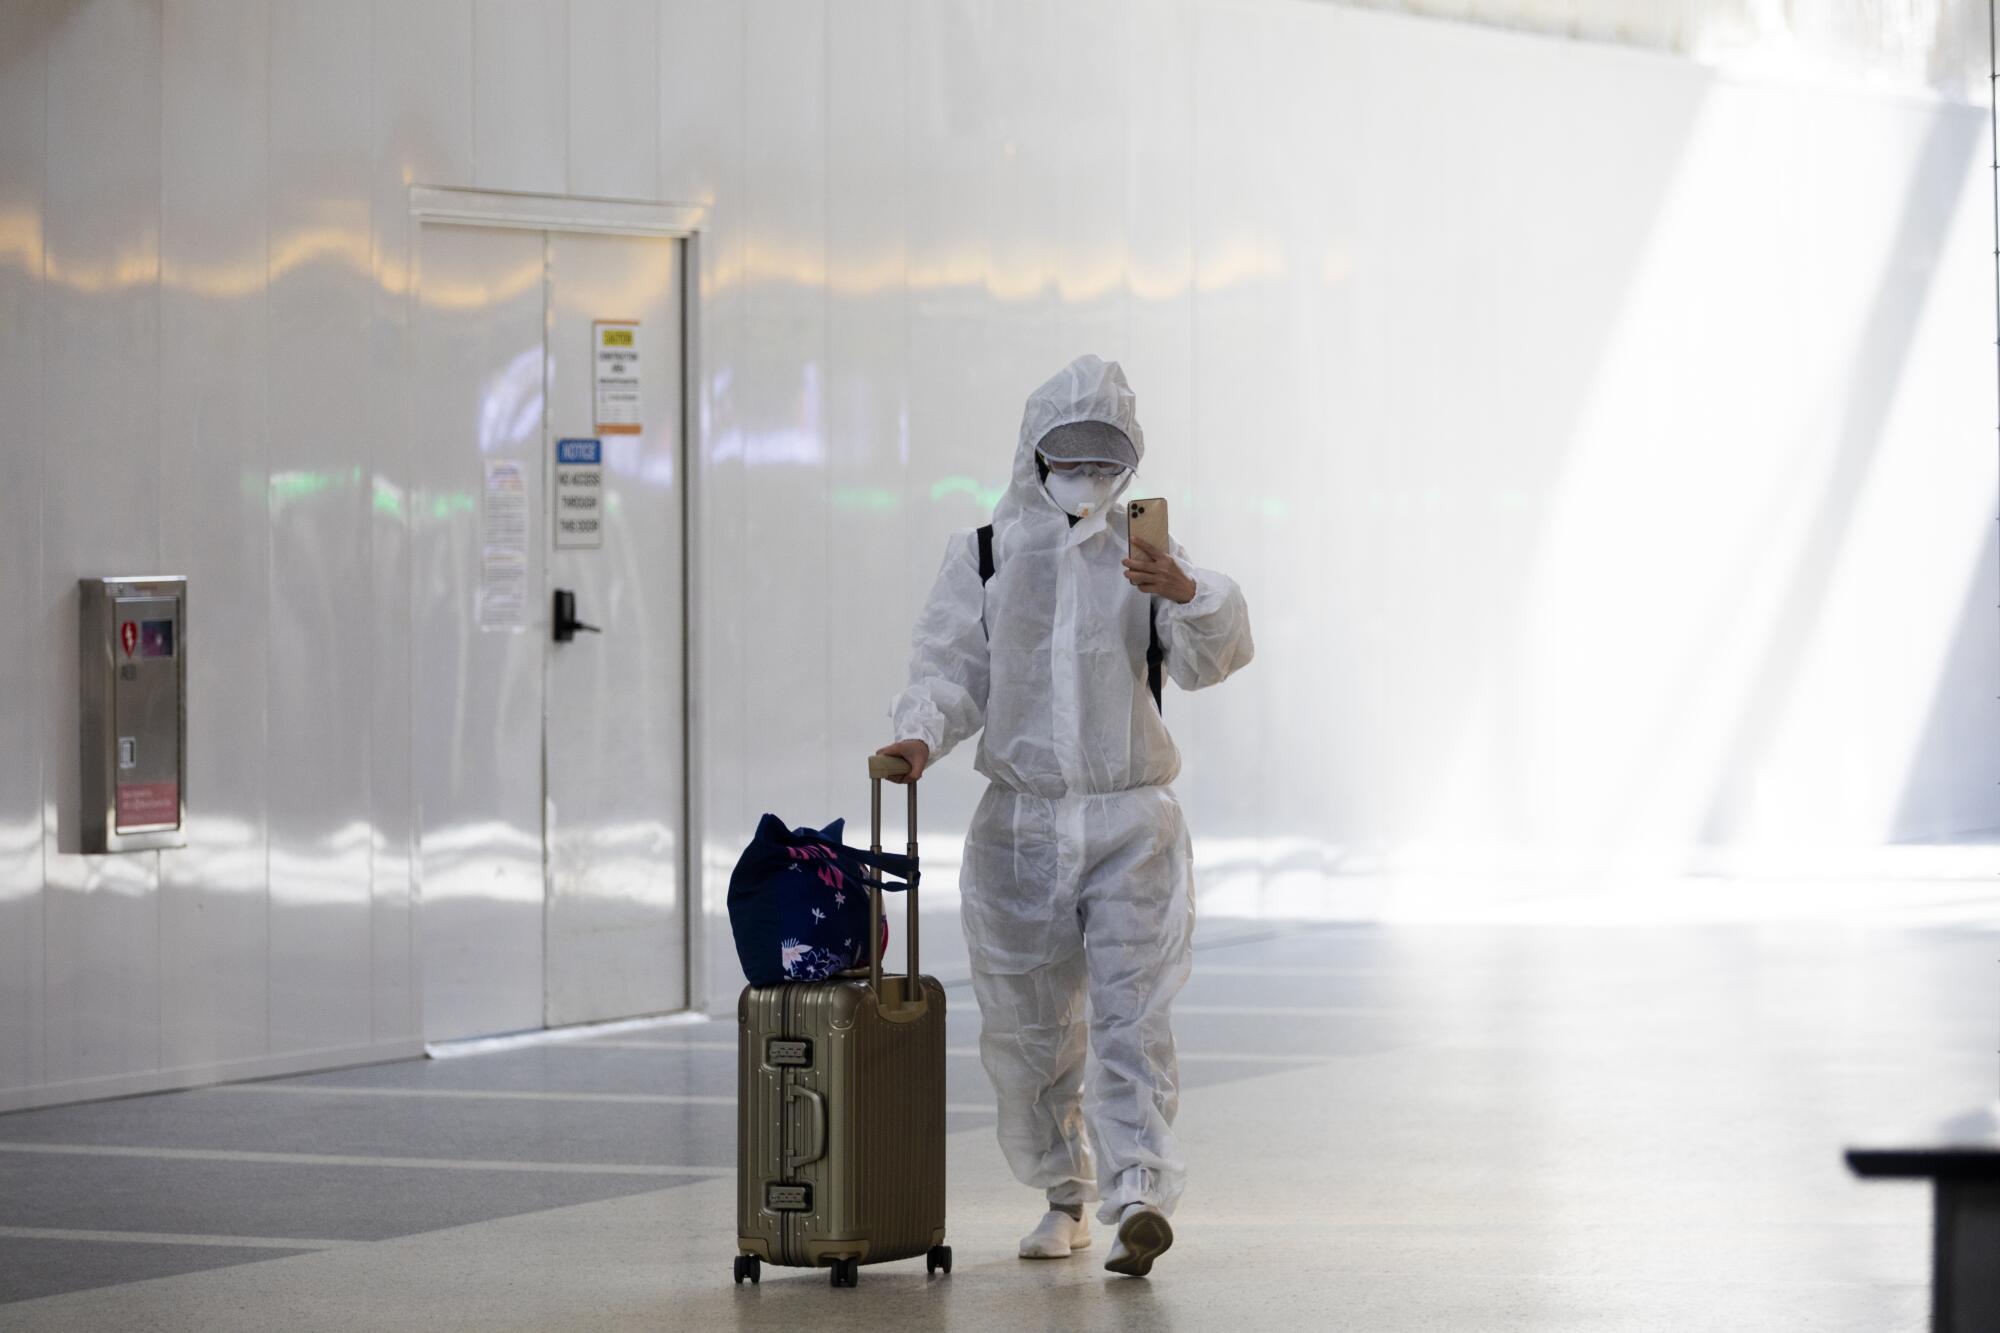 A person wears a full-body protective suit while pushing their luggage through an airport hallway